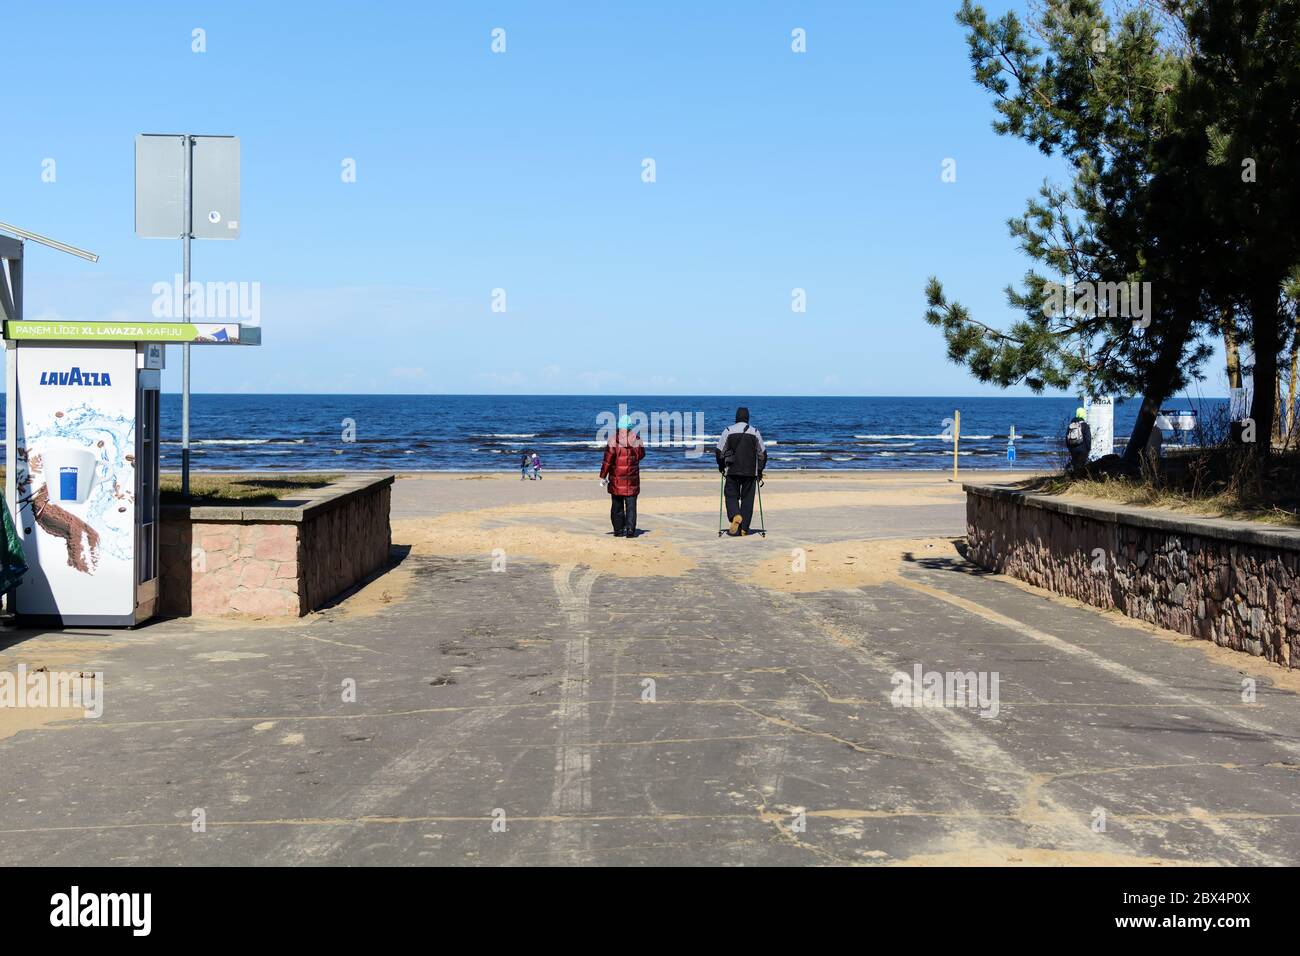 Man on crutches going to the sea with a woman Stock Photo